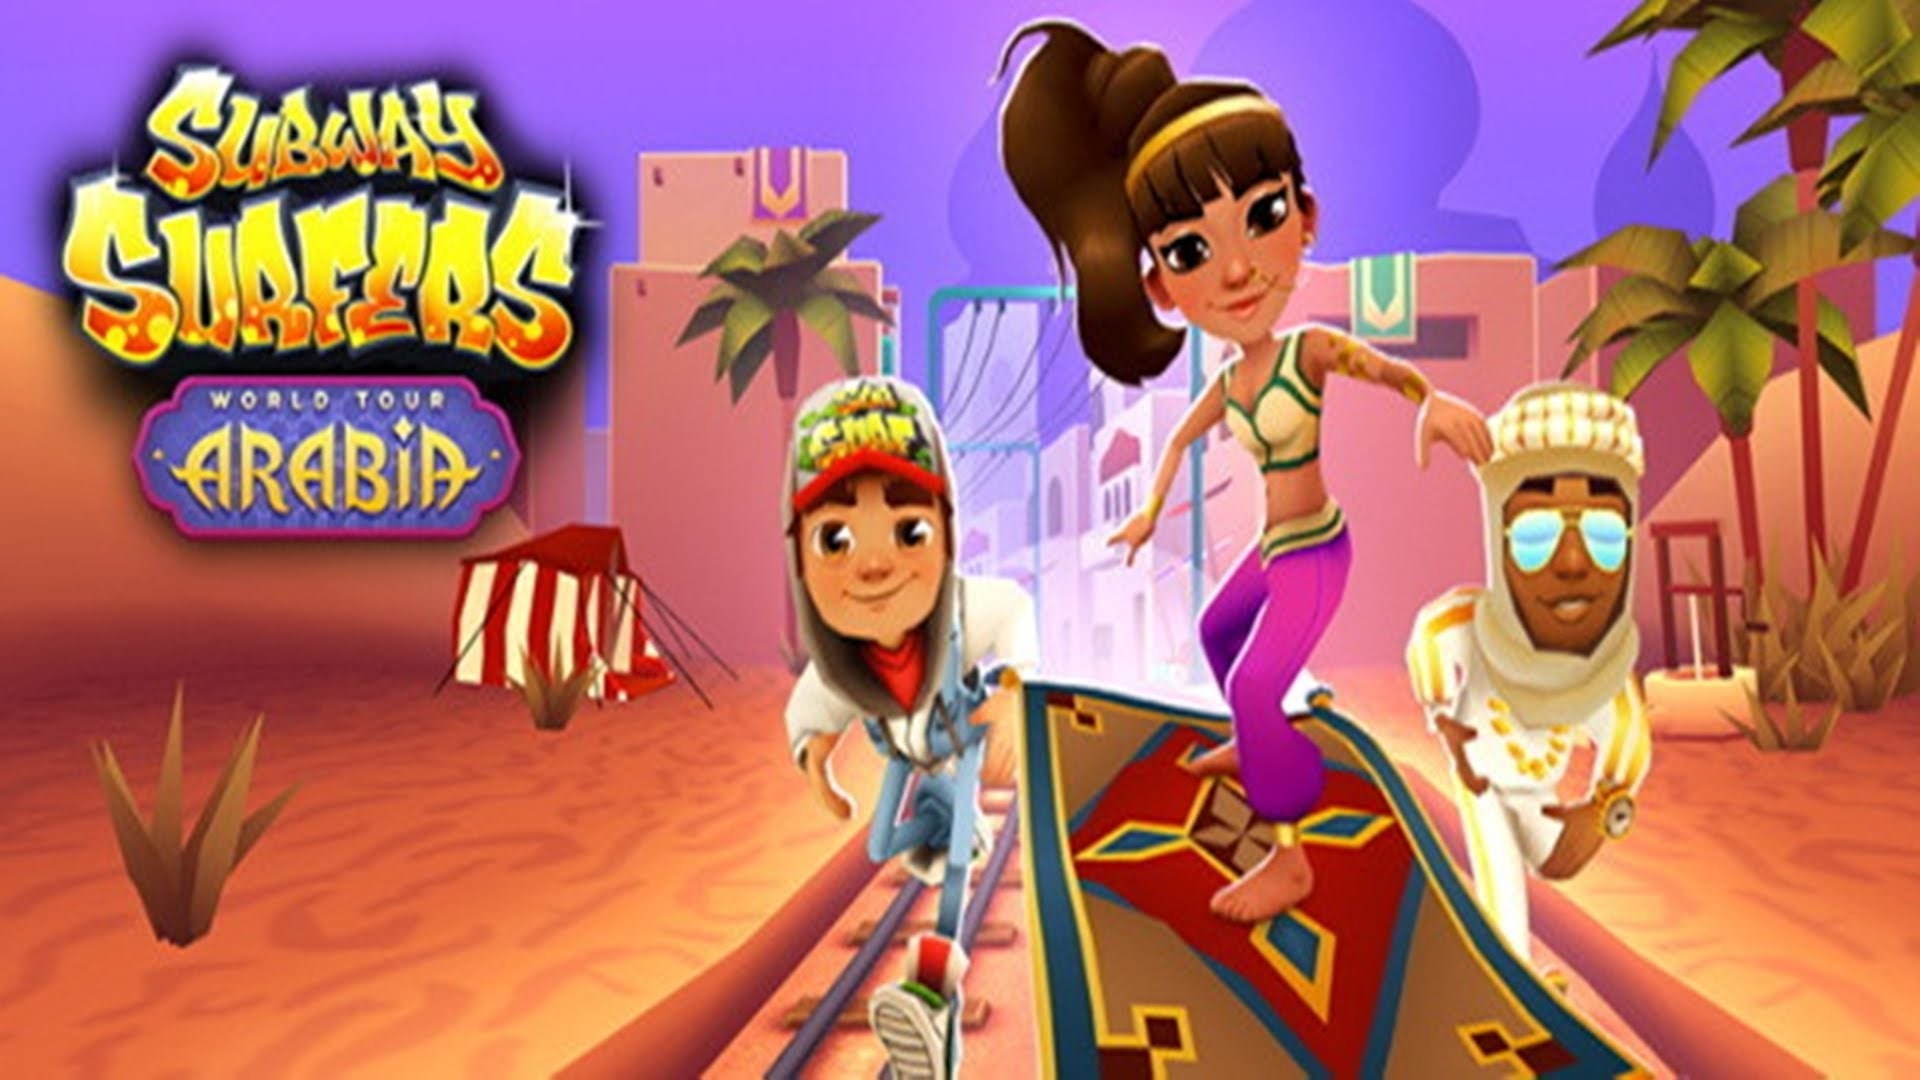 Power ups and challenges in Subway Surfers Arabia